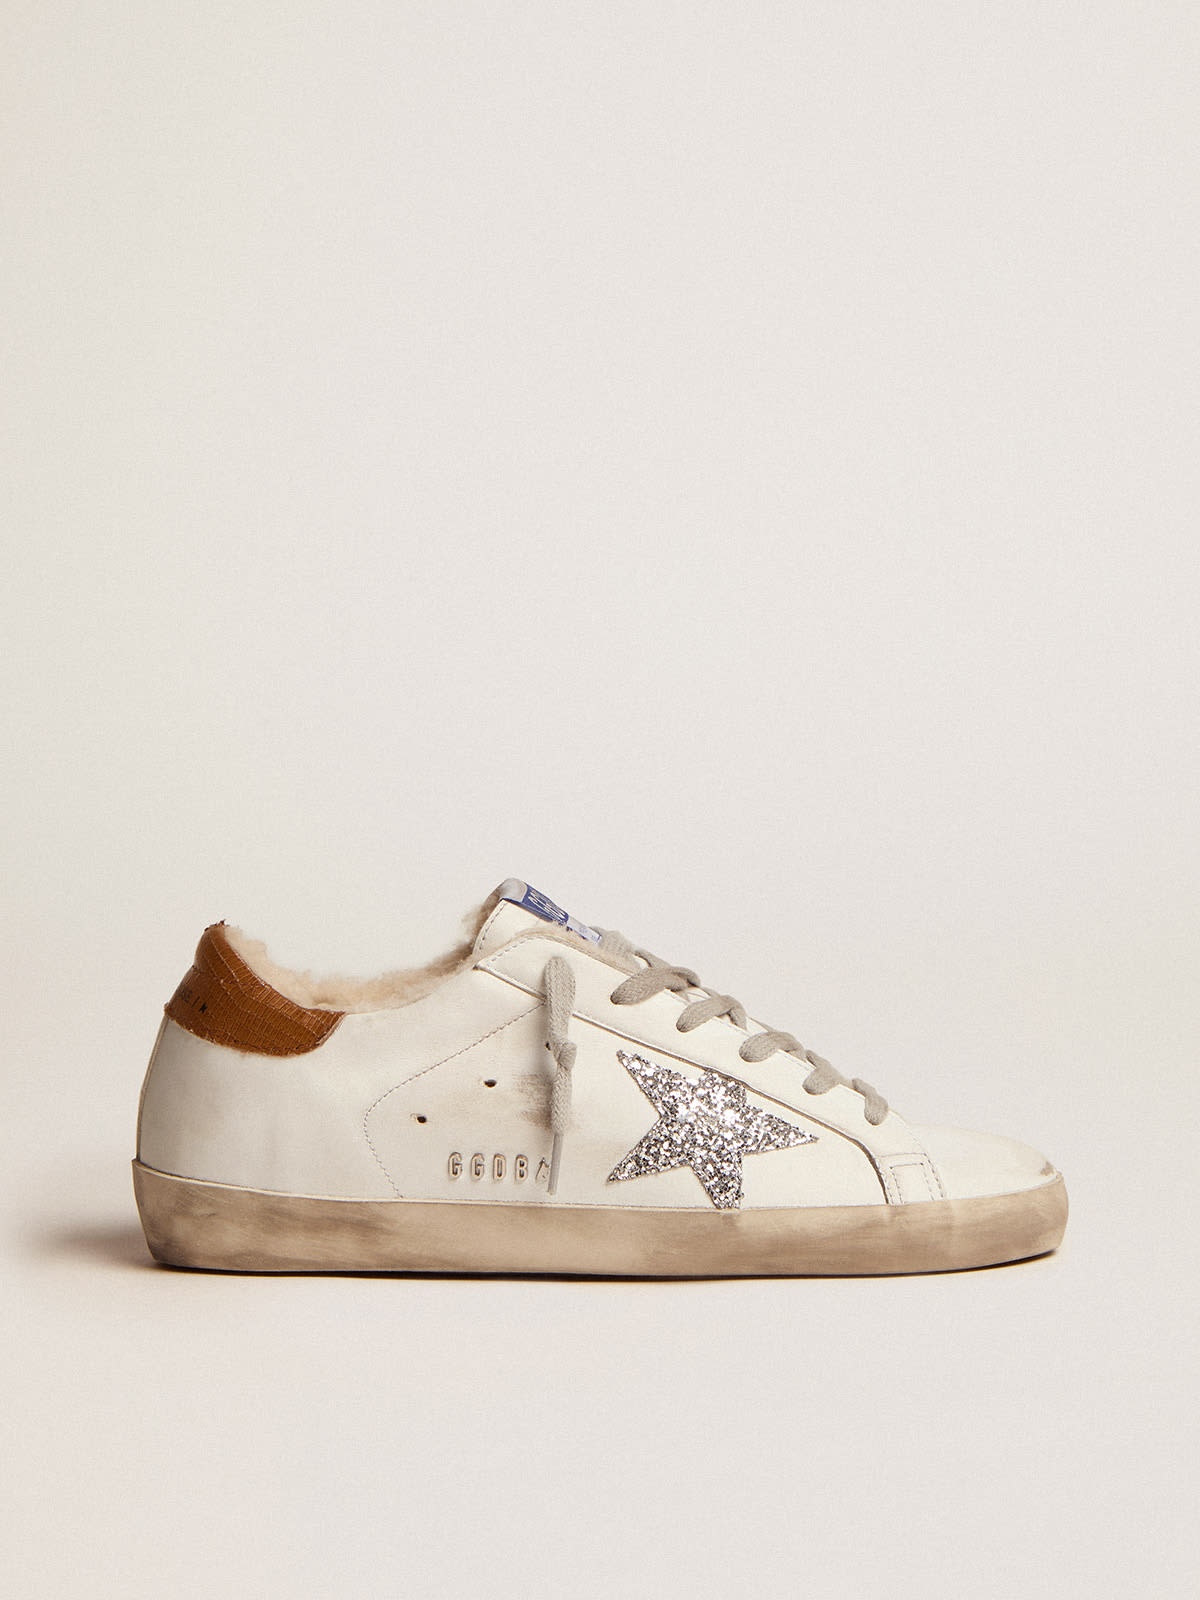 Super-Star sneakers with shearling lining, silver glitter star and lizard-print dove-gray leather he - 1